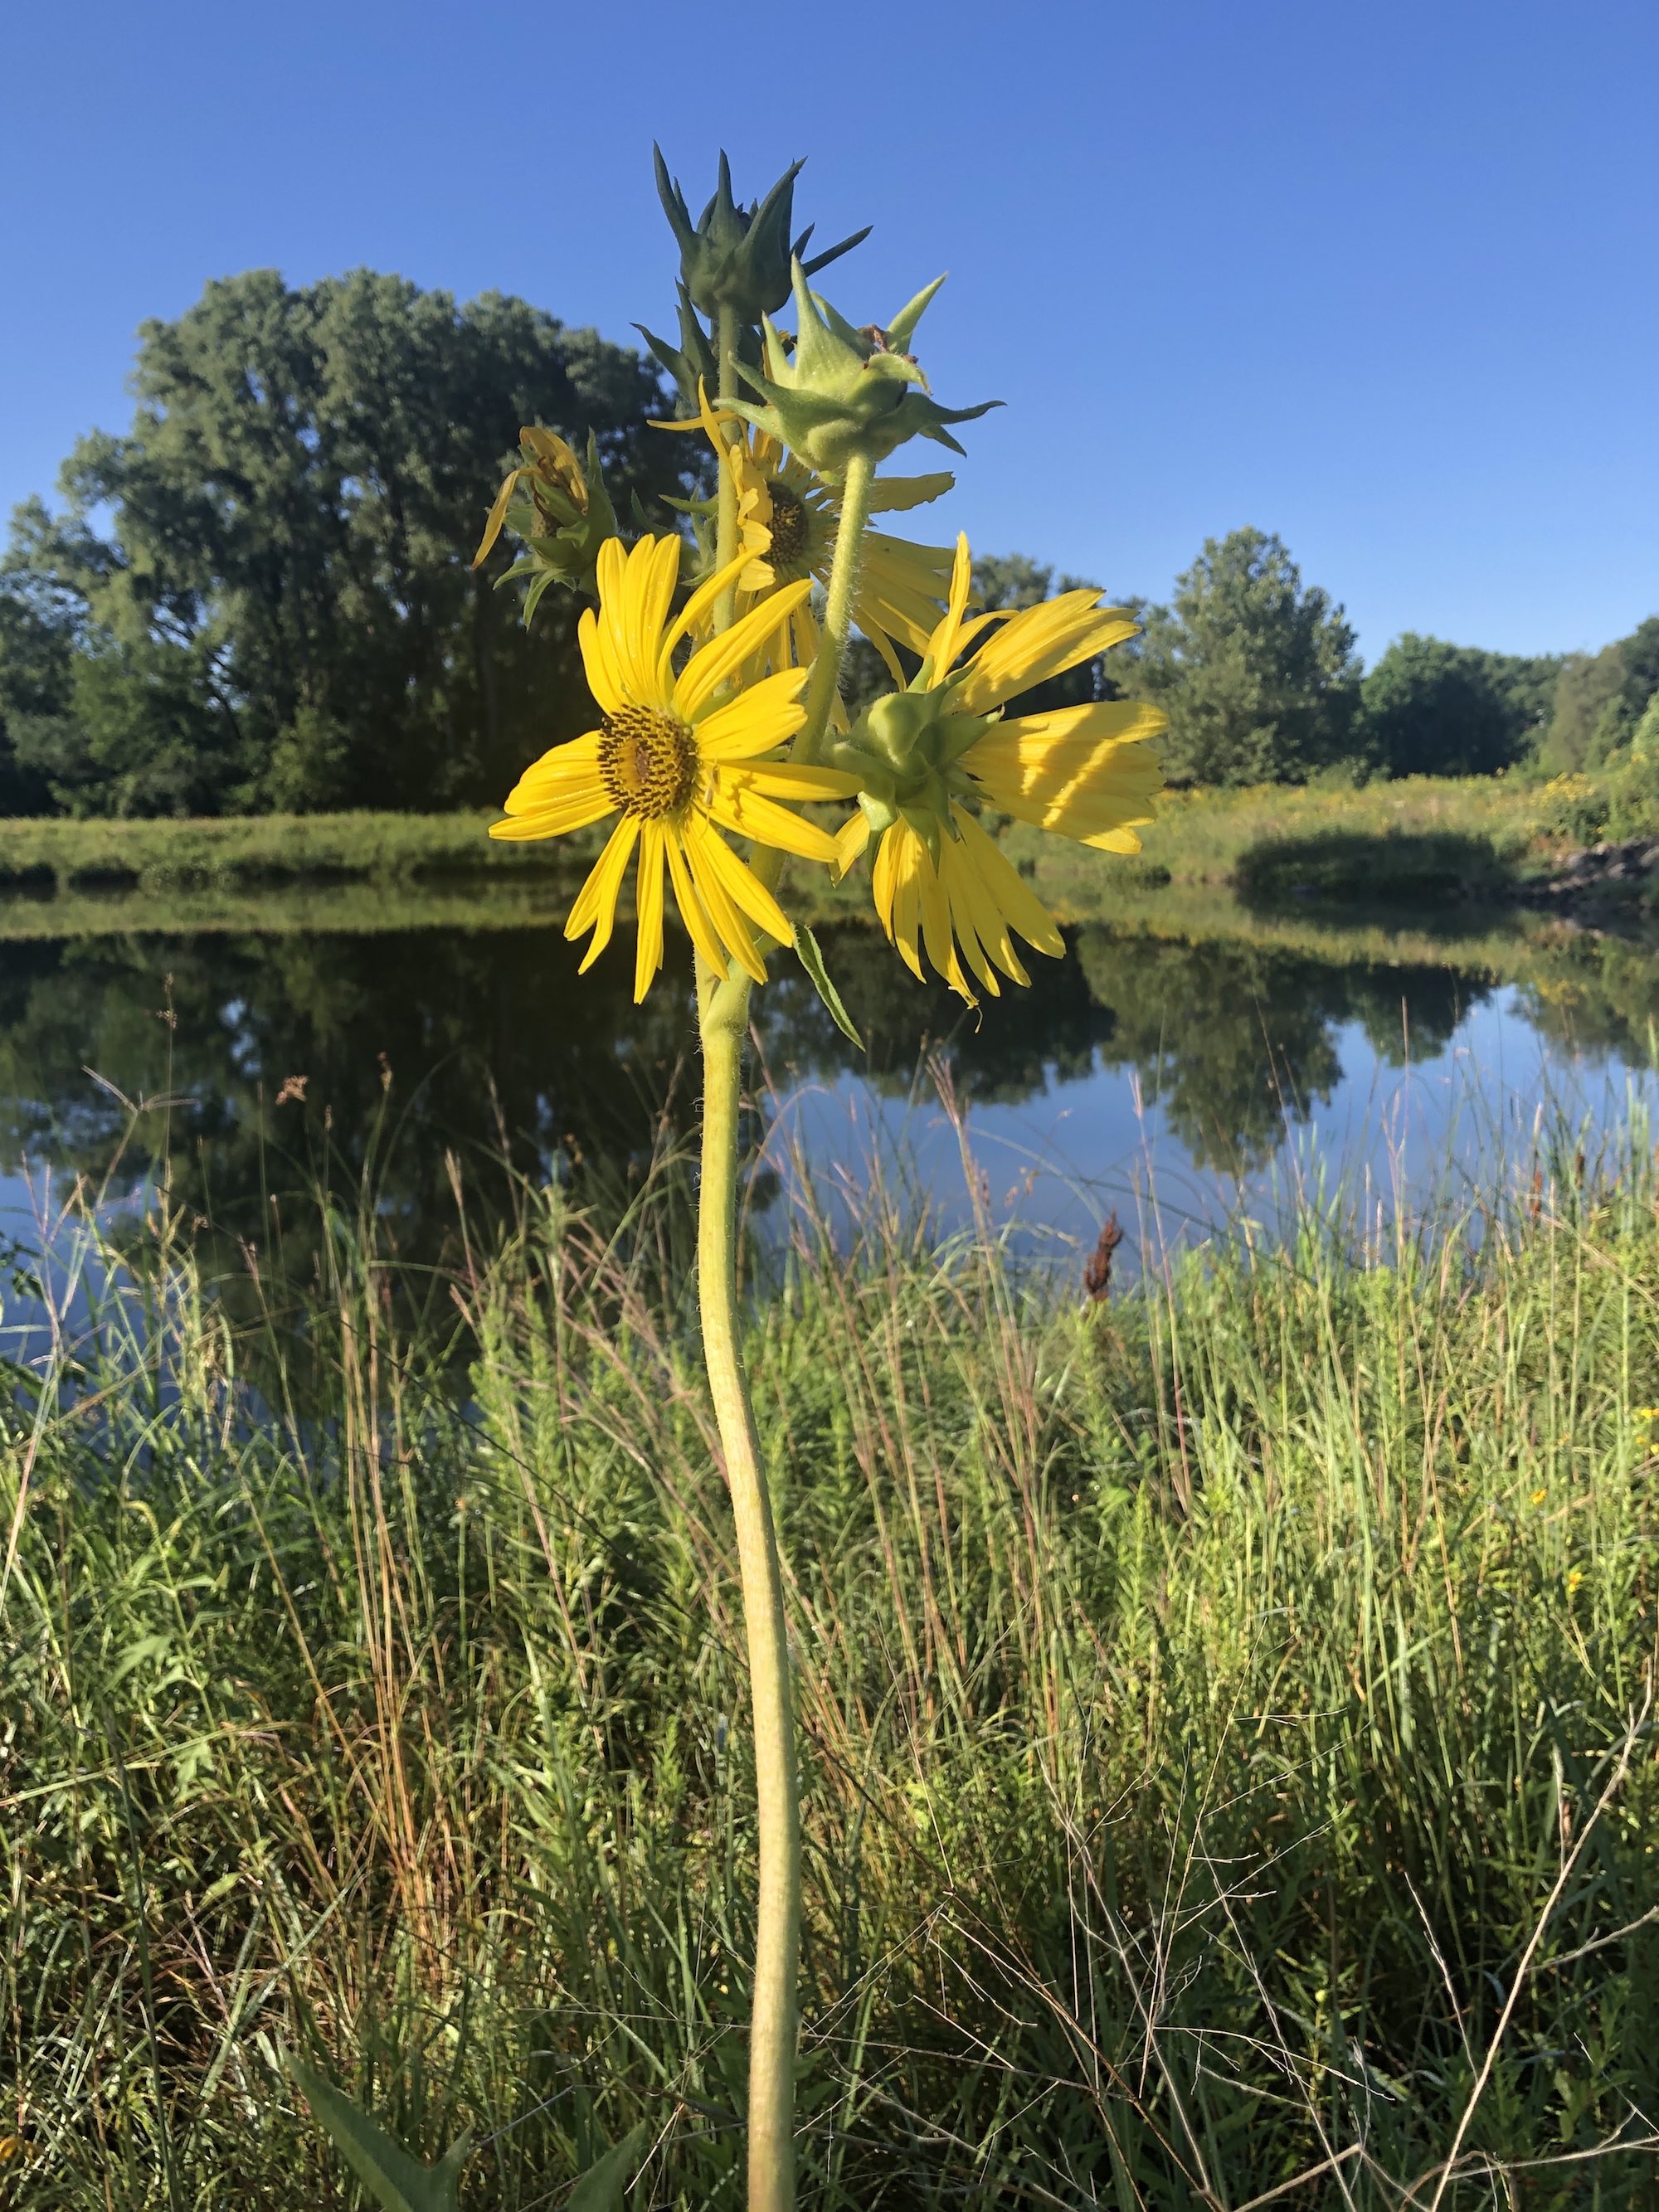 Compass Plant on the shore of the retaining pond on the corner of Nakoma Road and Manitou Way in Madison, Wisconsin on August 11, 2020.